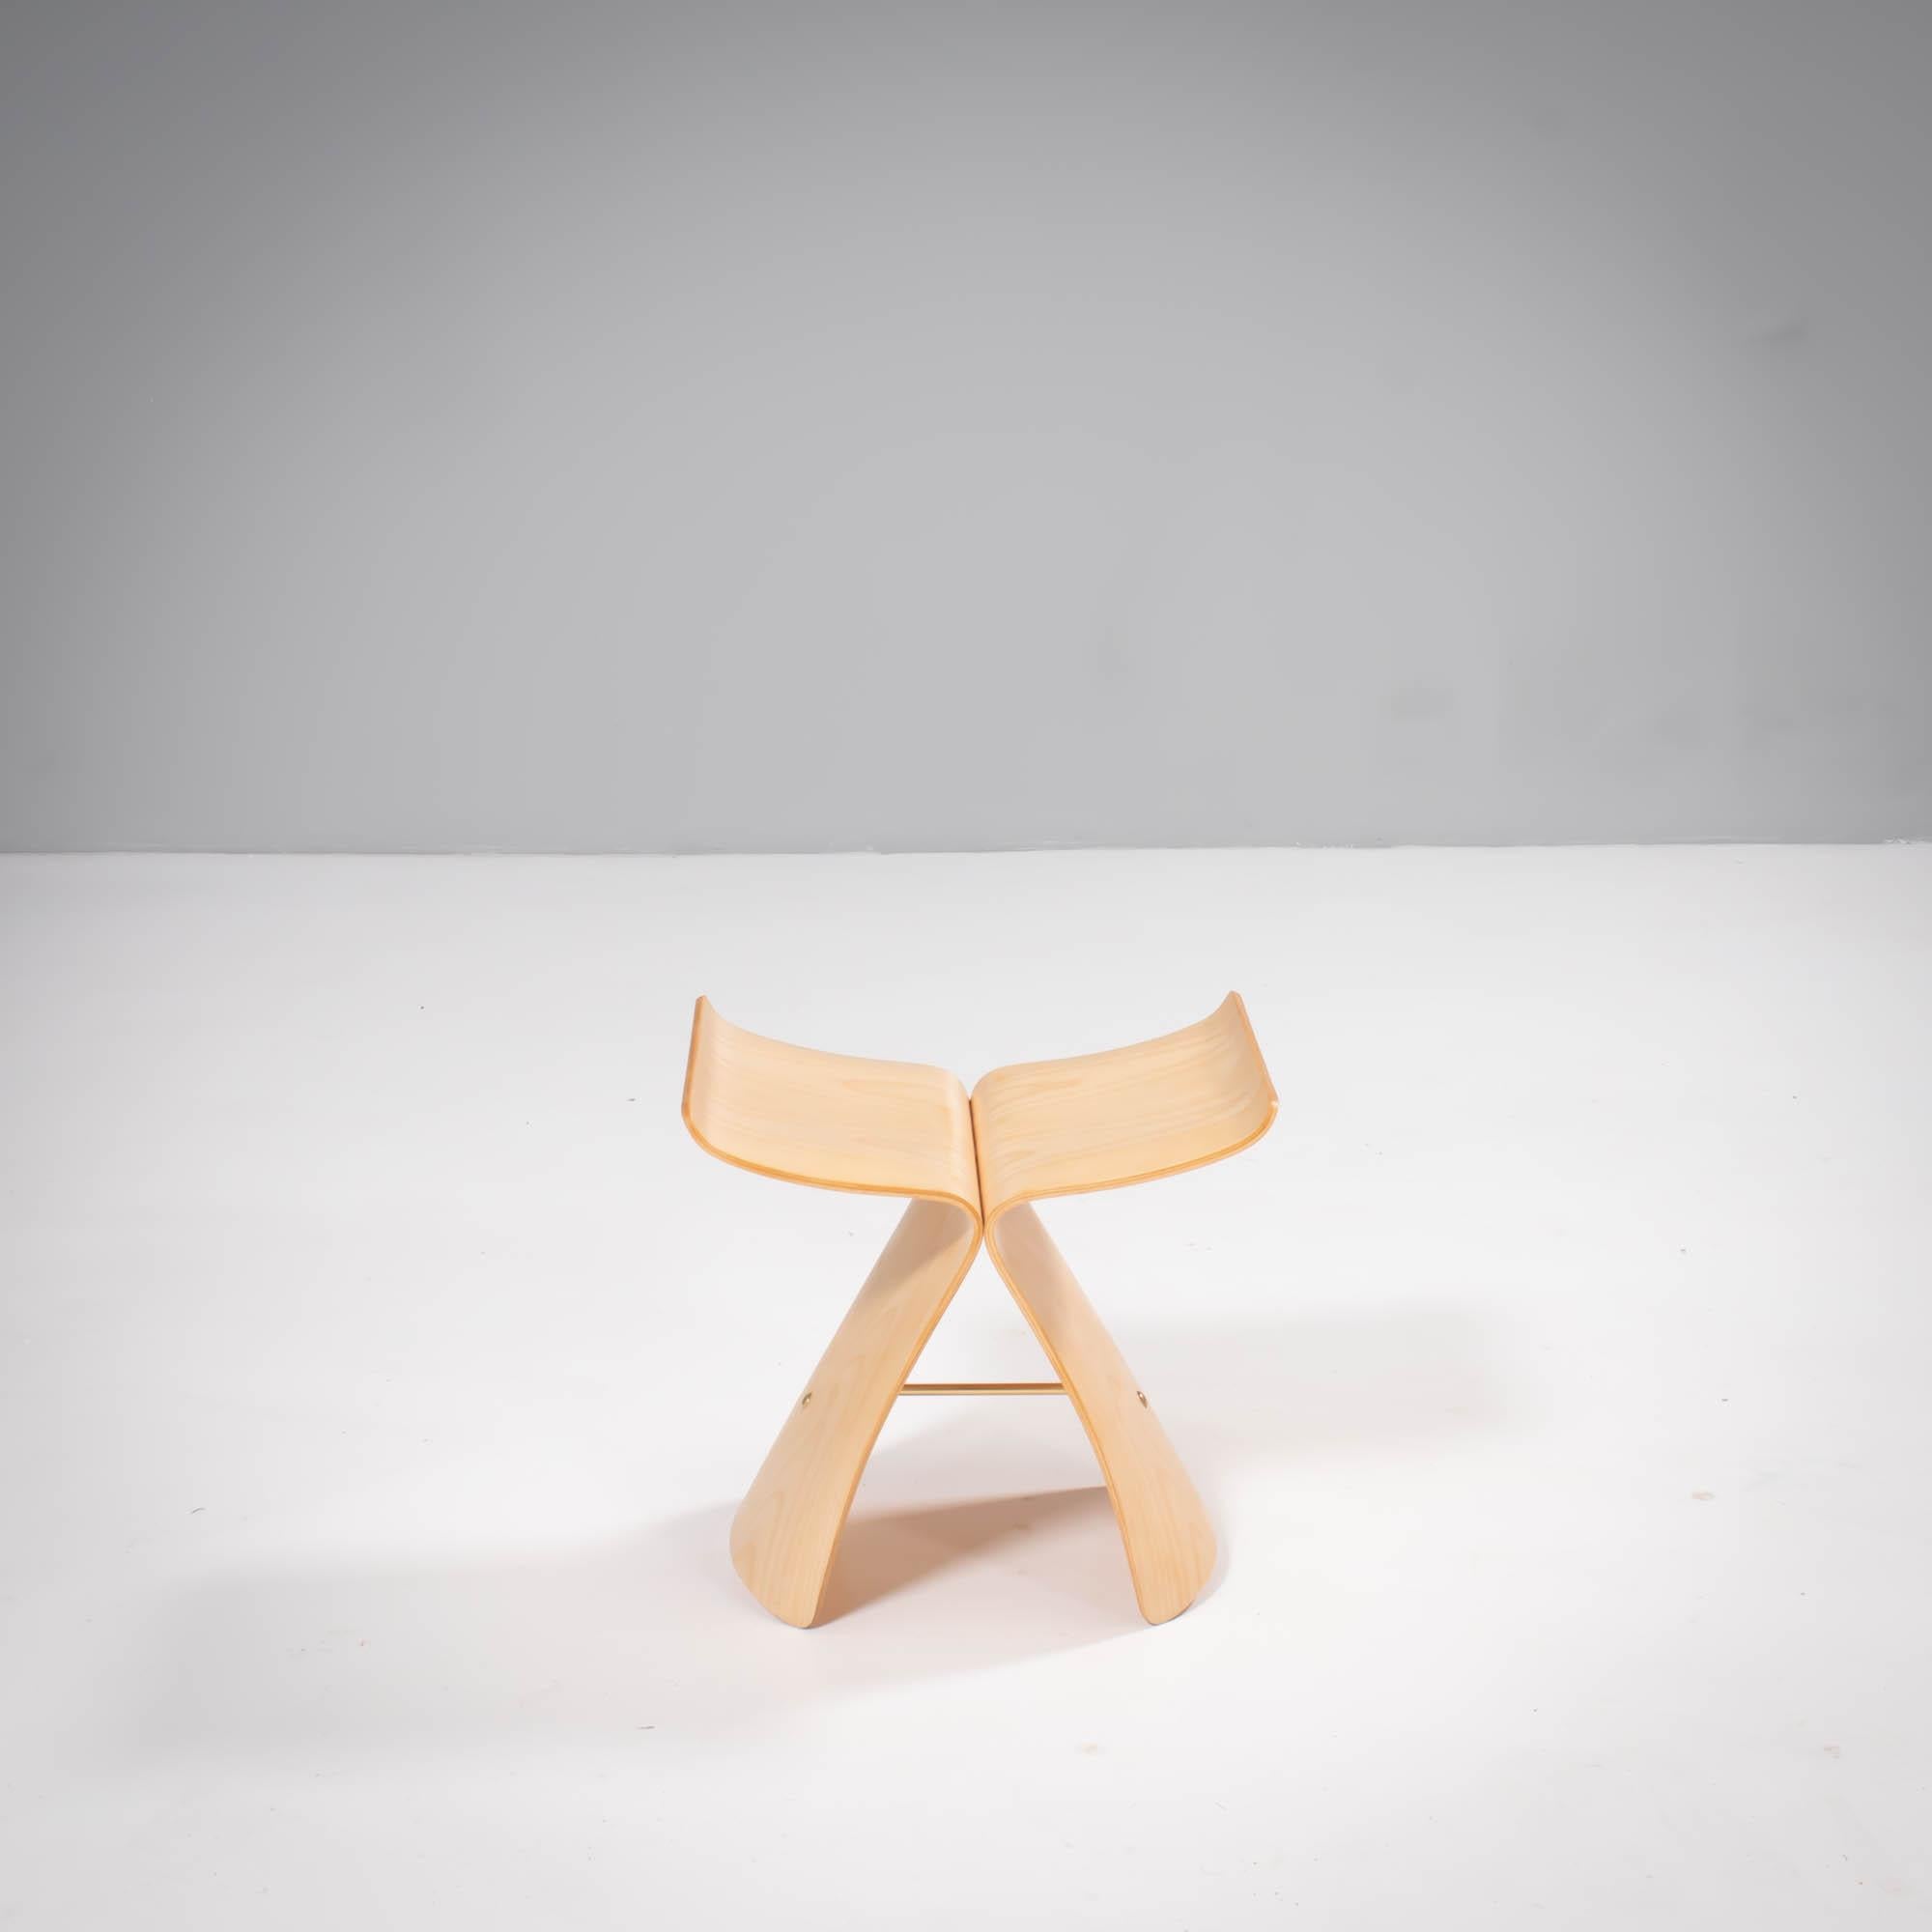 Originally designed by Sori Yanagi in 1954, the Butterfly Stool has since become a design icon.

Rooted in the designer’s Japanese aesthetic, the stool was created using the moulded plywood techniques that were first developed by Charles and Ray